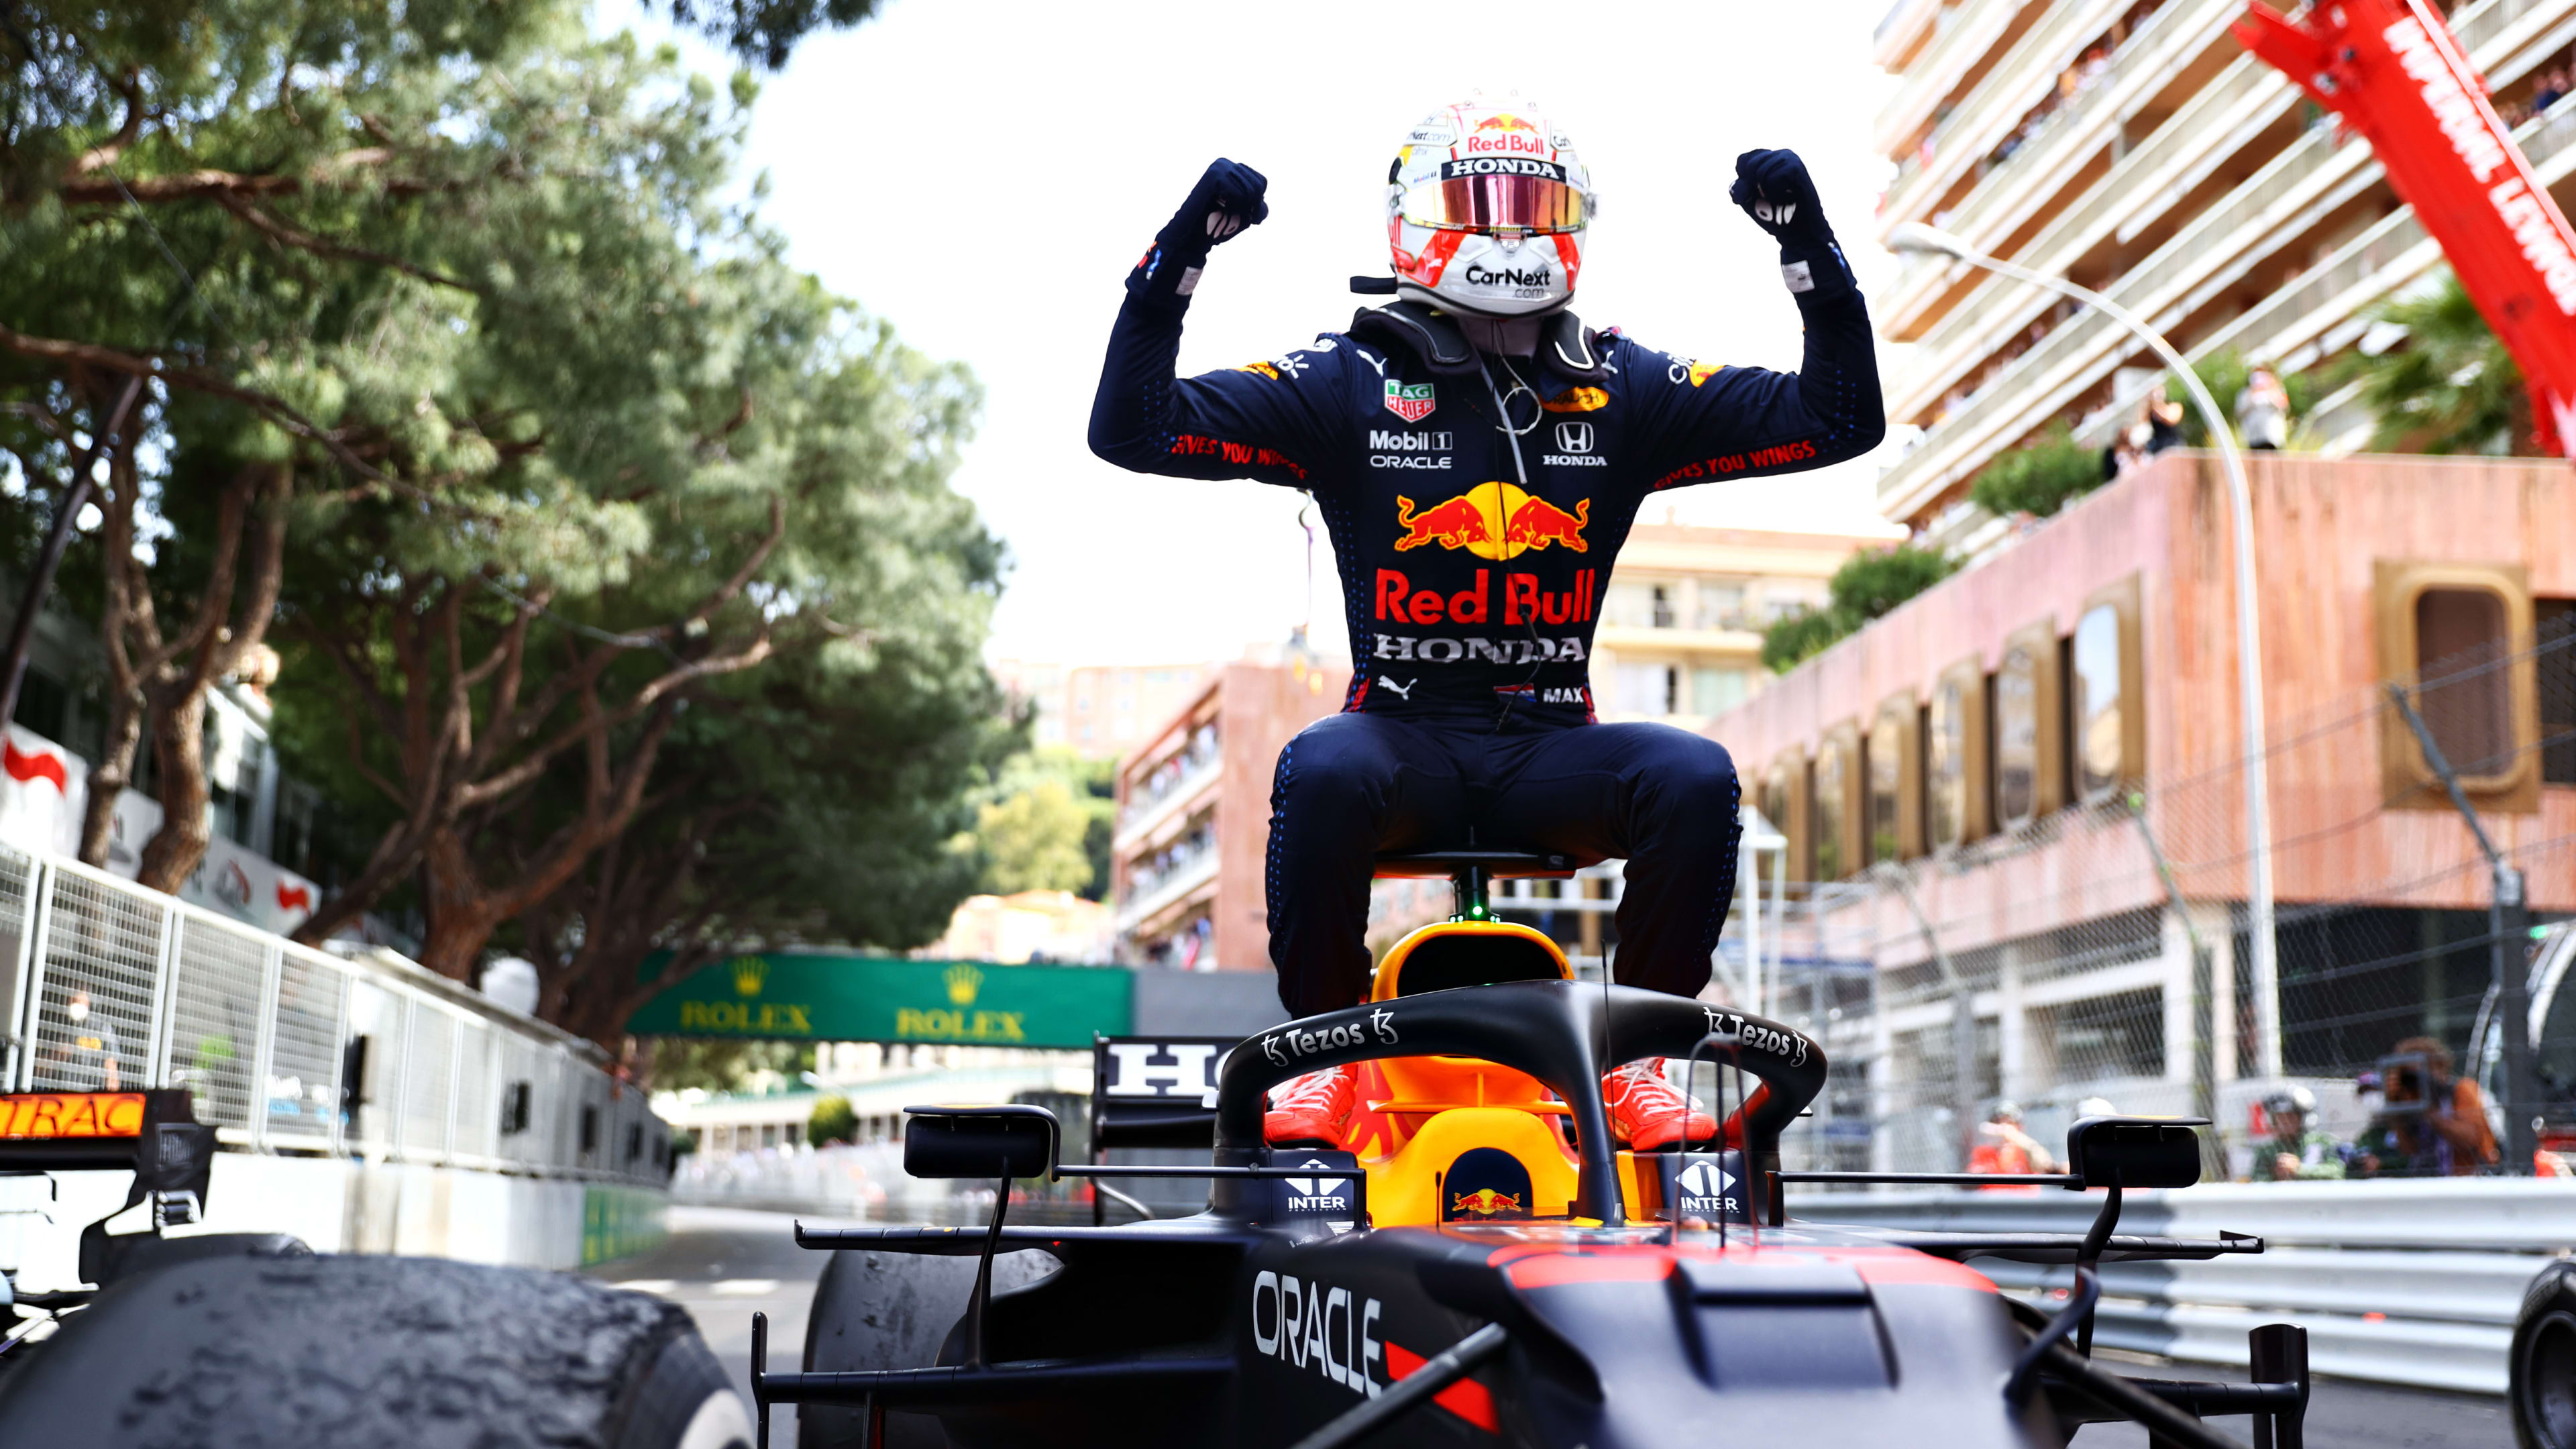 2021 Monaco Grand Prix race report &amp; highlights: Verstappen claims Monaco victory over Sainz and Norris, after polesitter Leclerc fails to take start | Formula 1®